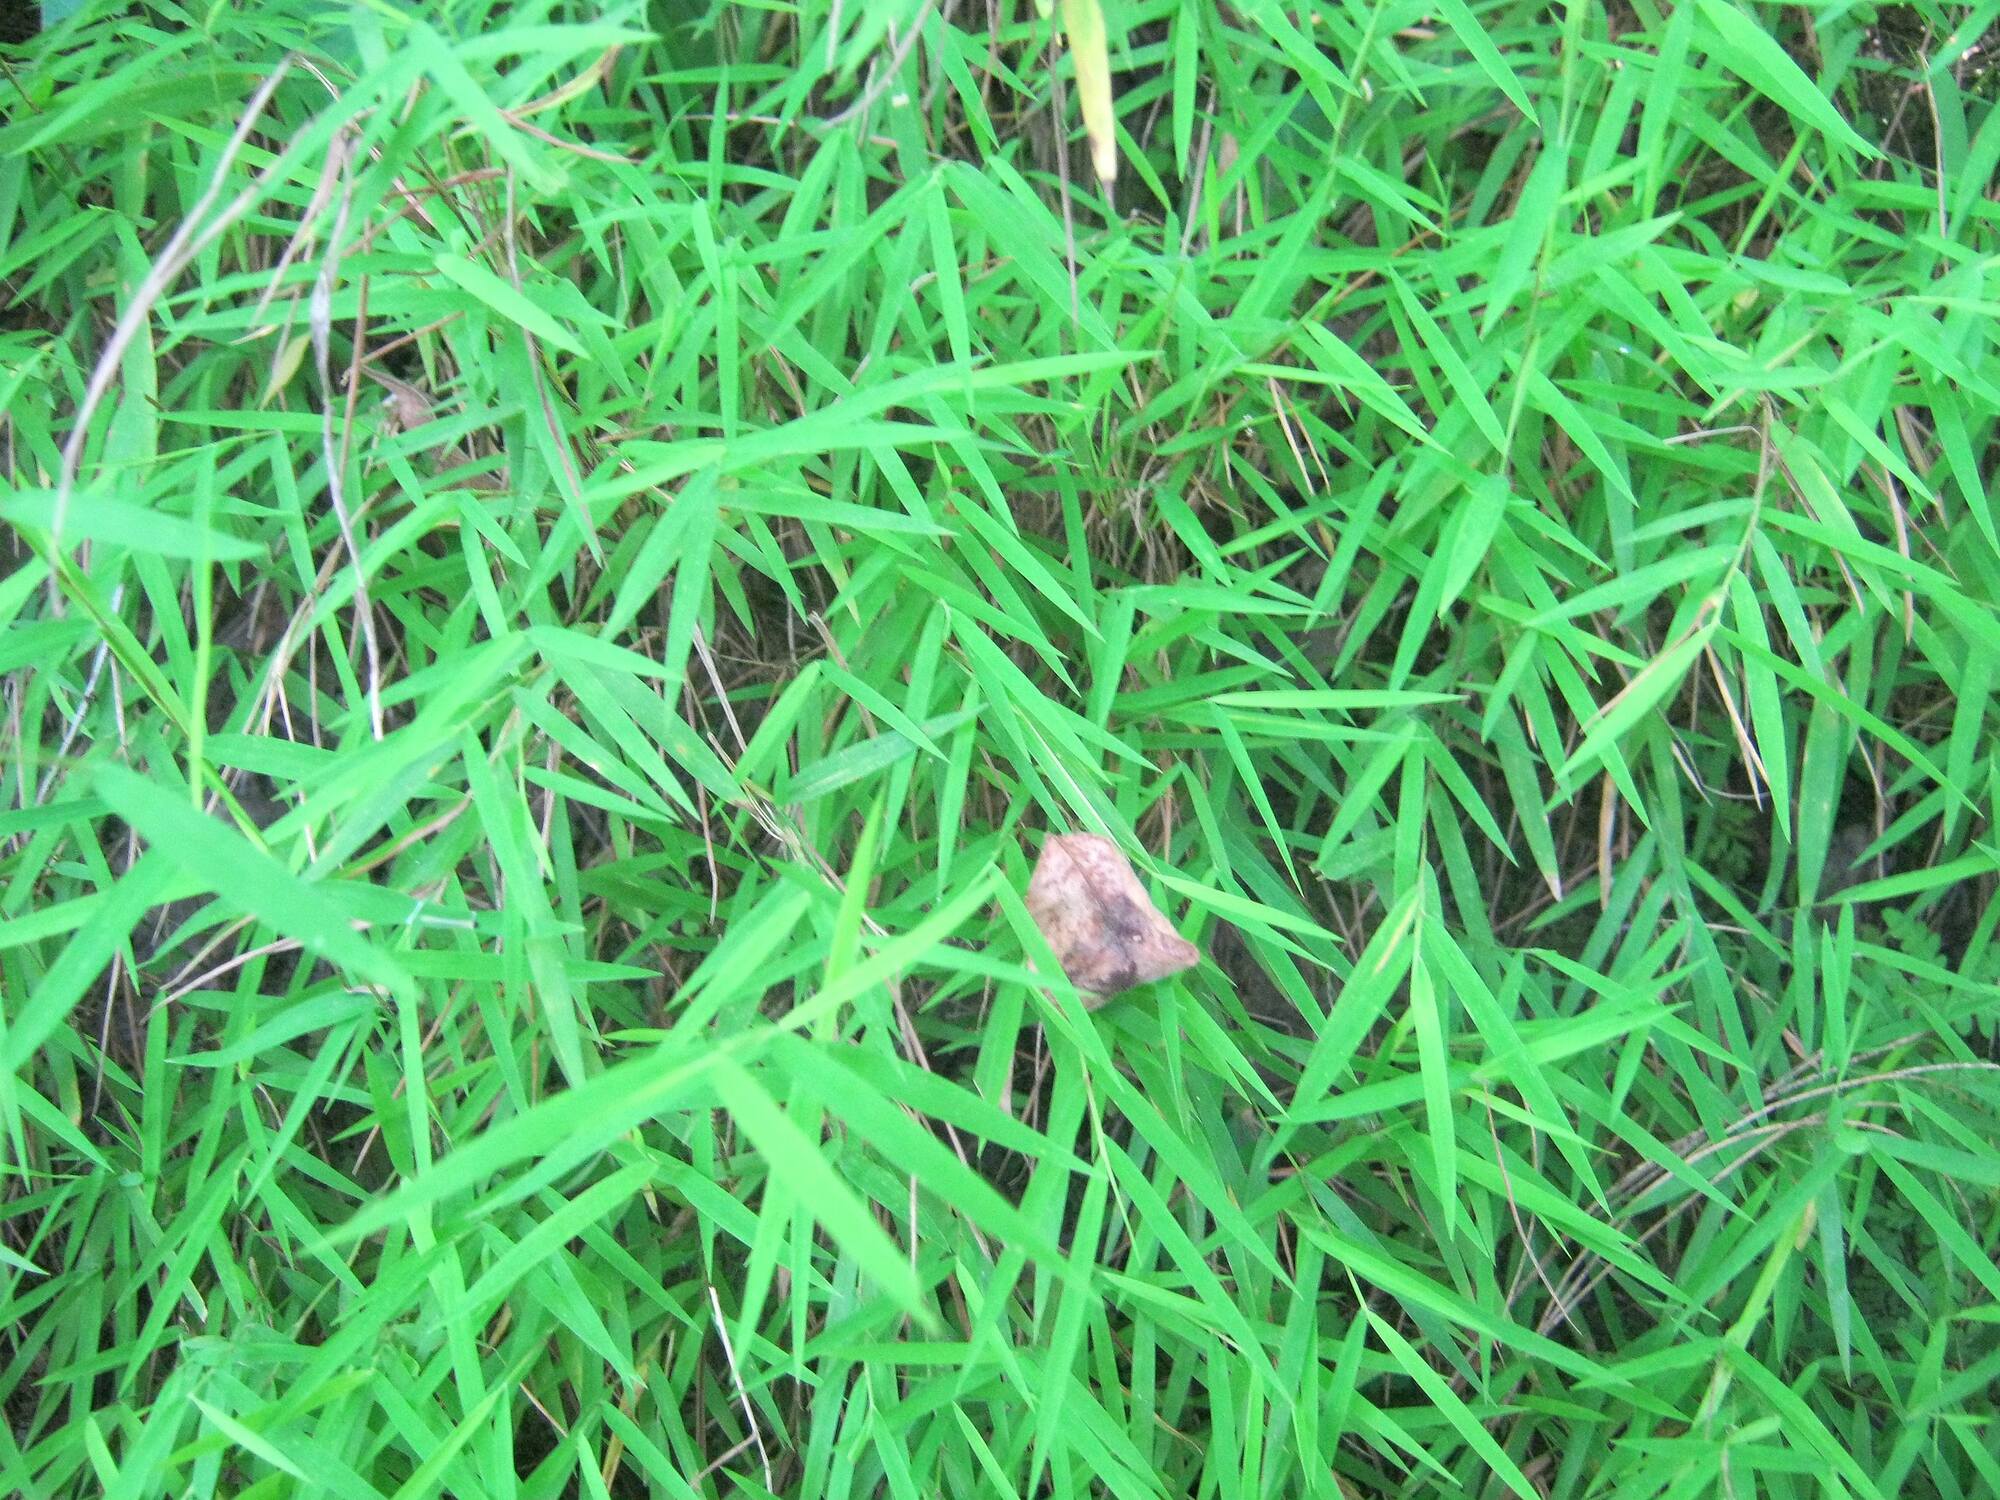 Photograph showing a close-up image of baby bamboo grass growing in its natural habitat in Nepal. The blades are long and thin.